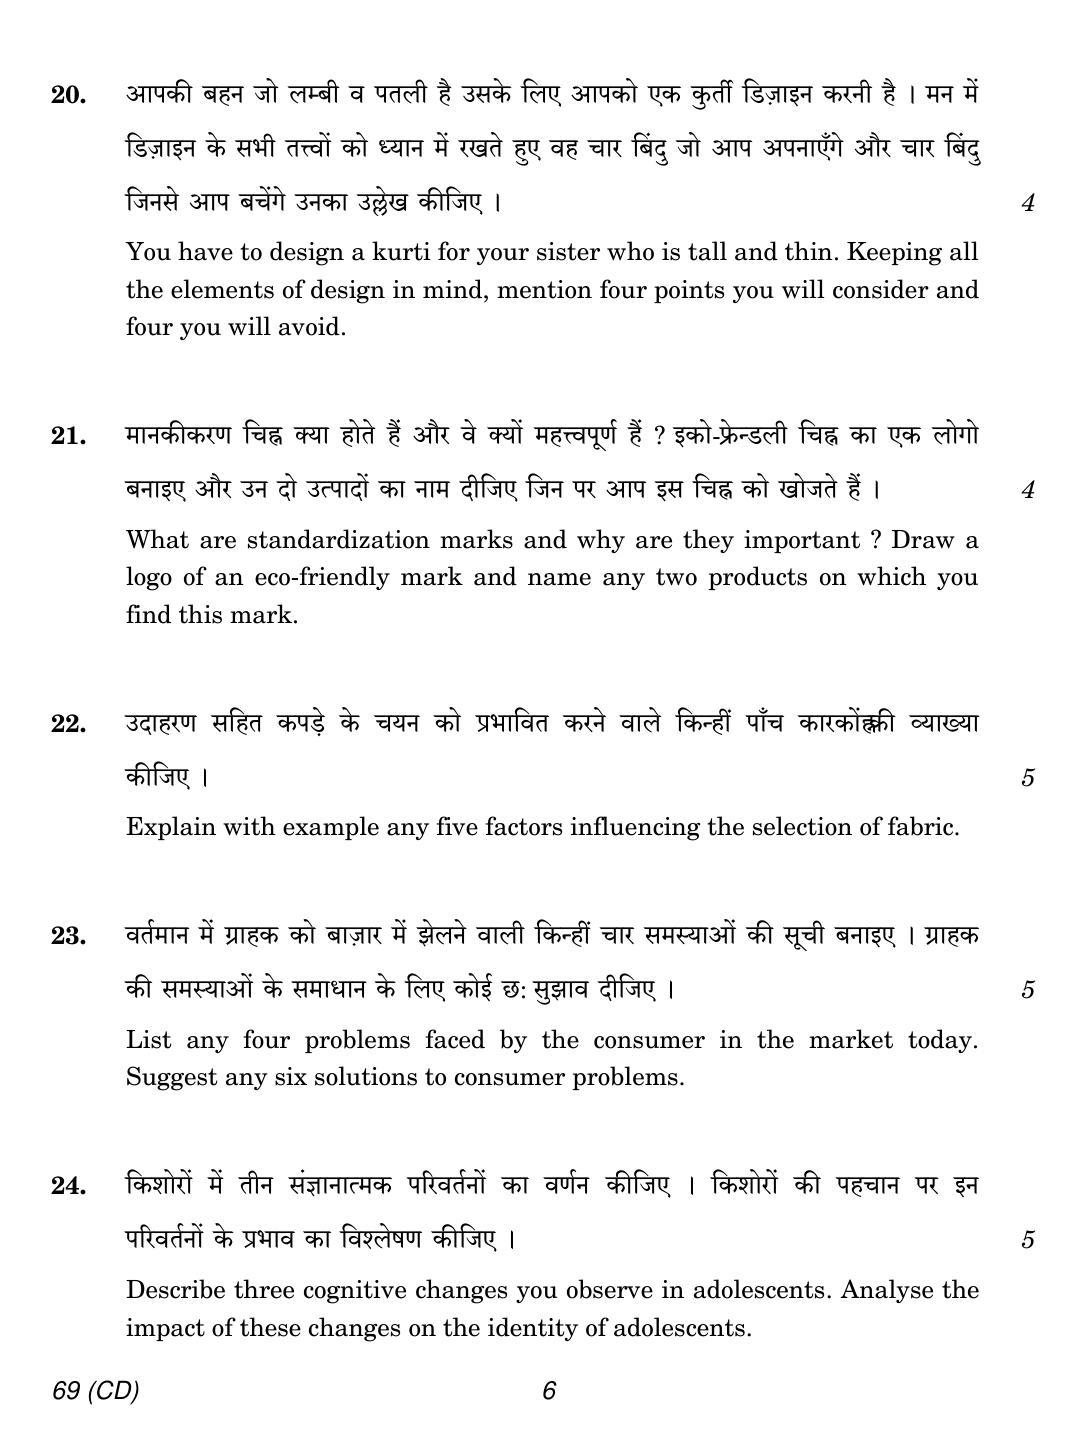 CBSE Class 12 69 HOME SCIENCE CD 2018 Question Paper - Page 6